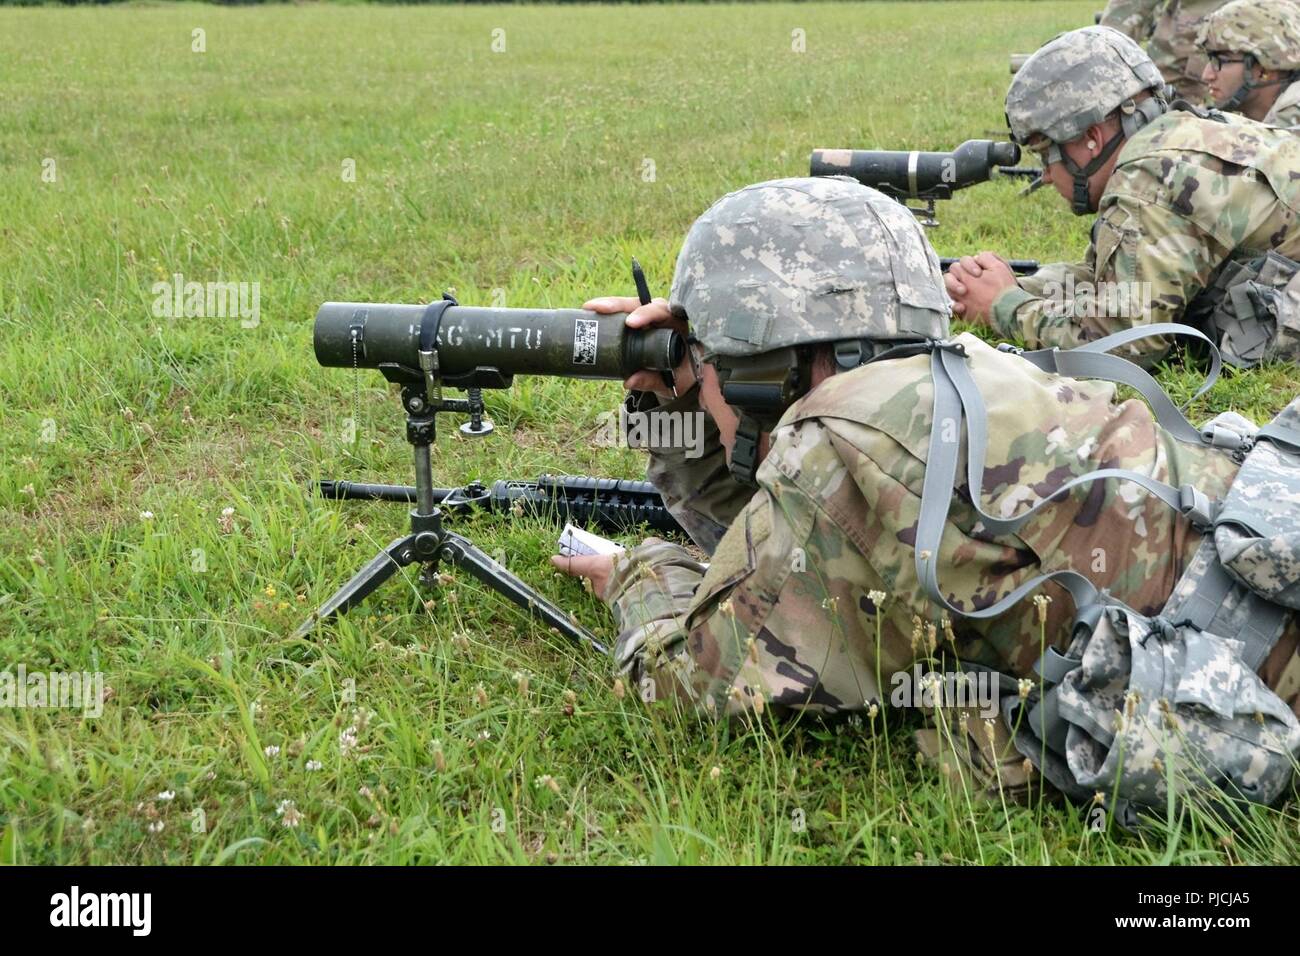 Staff Sgt. Gregory Karli, D Company, 2nd Battalion, 104th Aviation Regiment, 28th Expeditionary Combat Aviation Brigade, 28th Infantry Division looks at his target during the Governor’s Twenty Match held at Fort Indiantown Gap, July 21. Stock Photo